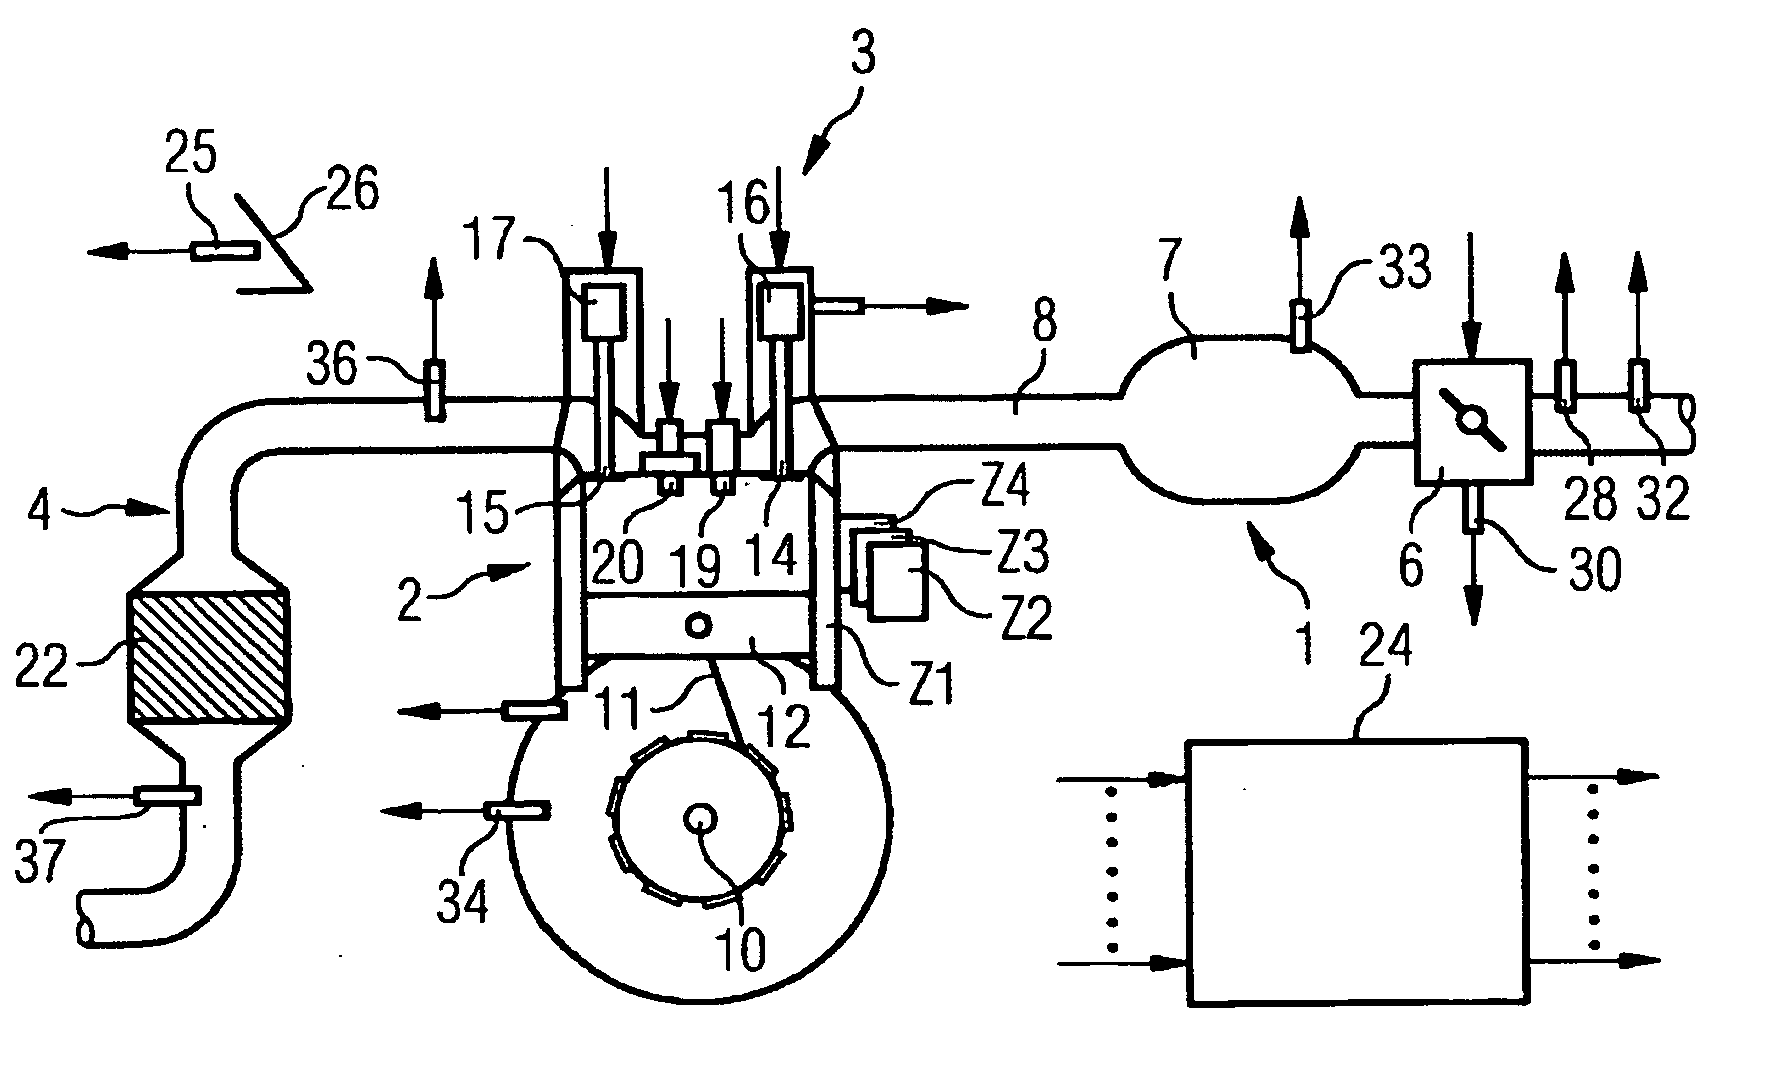 Method And Apparatus For Controlling An Internal Combustion Engine